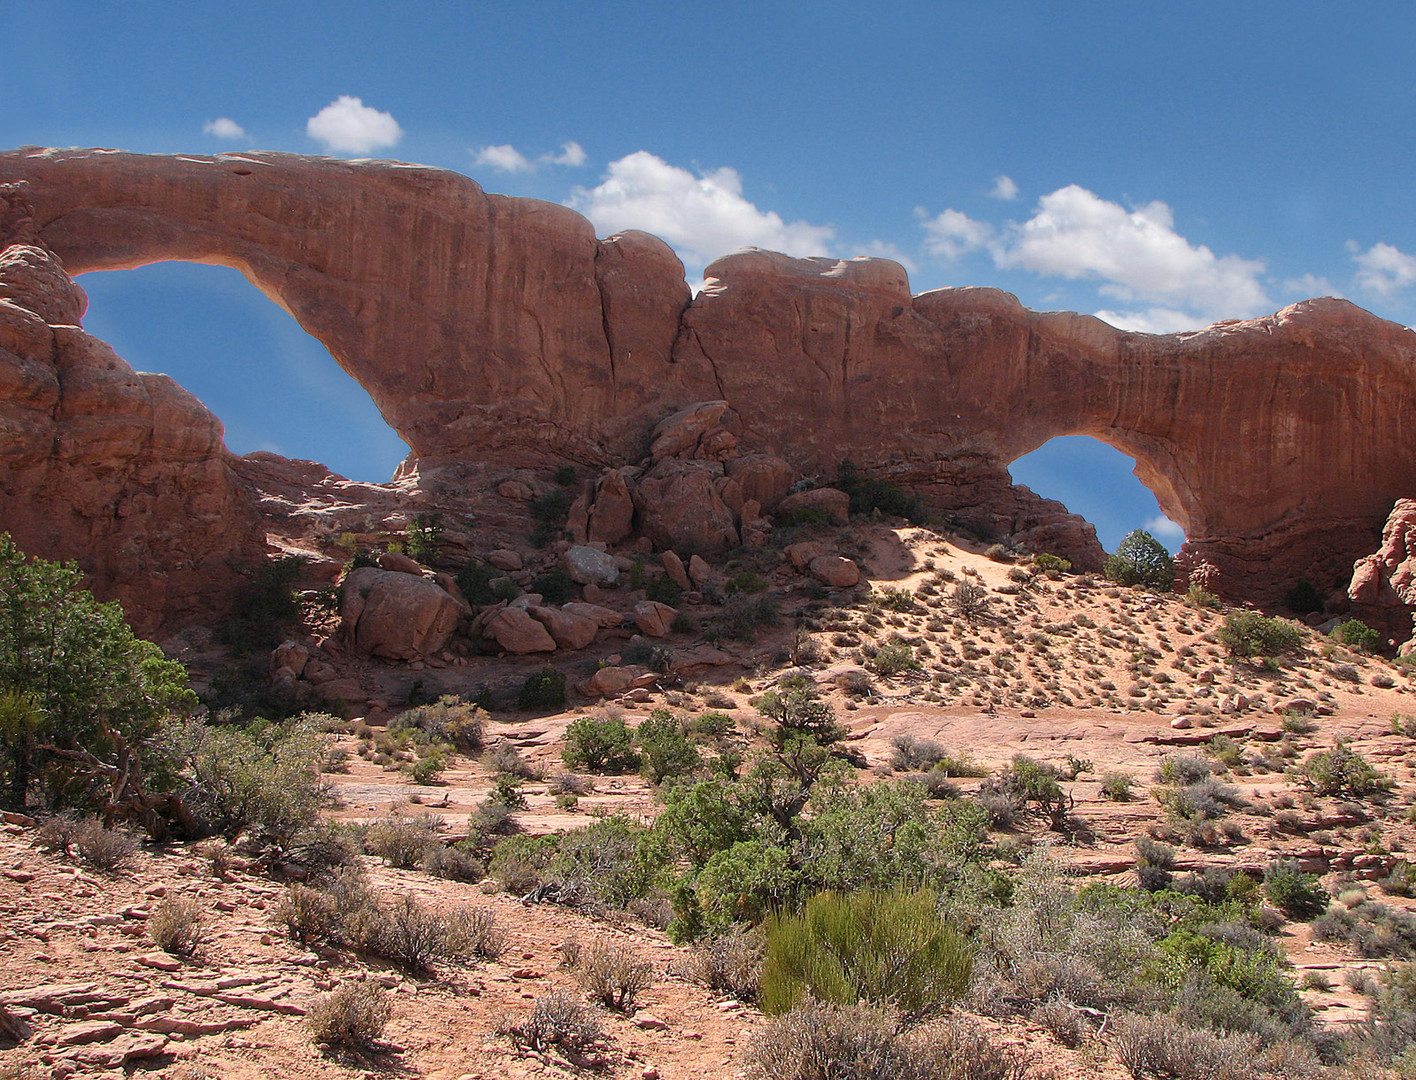 Arches - The Hills Have Eyes...